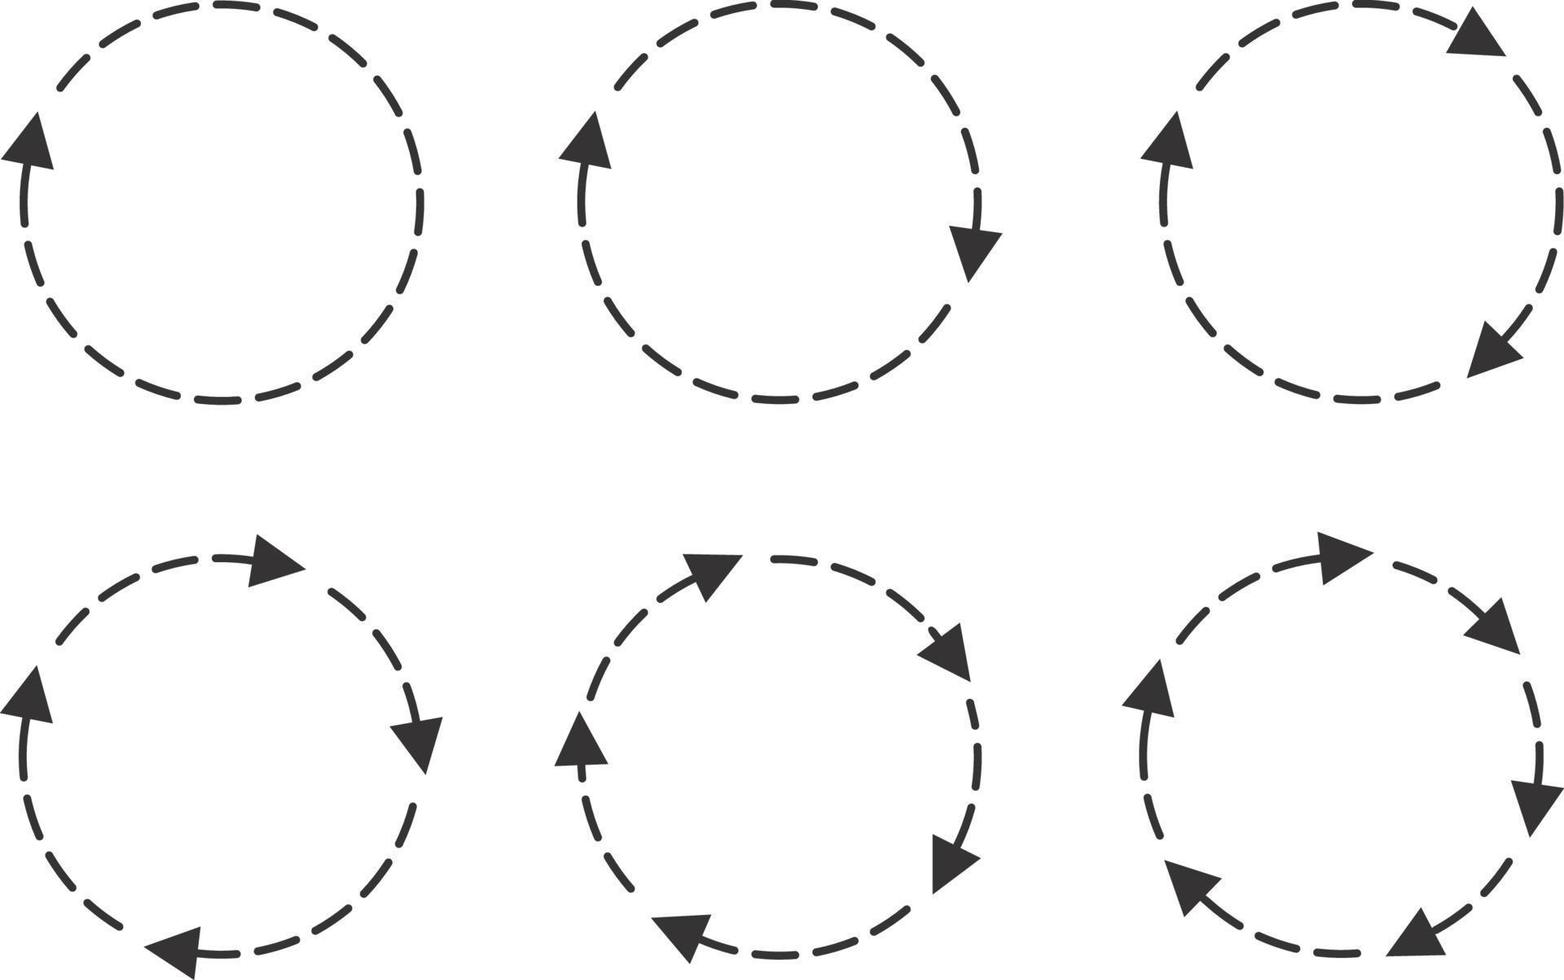 Circle arrows set isolate on white background. vector